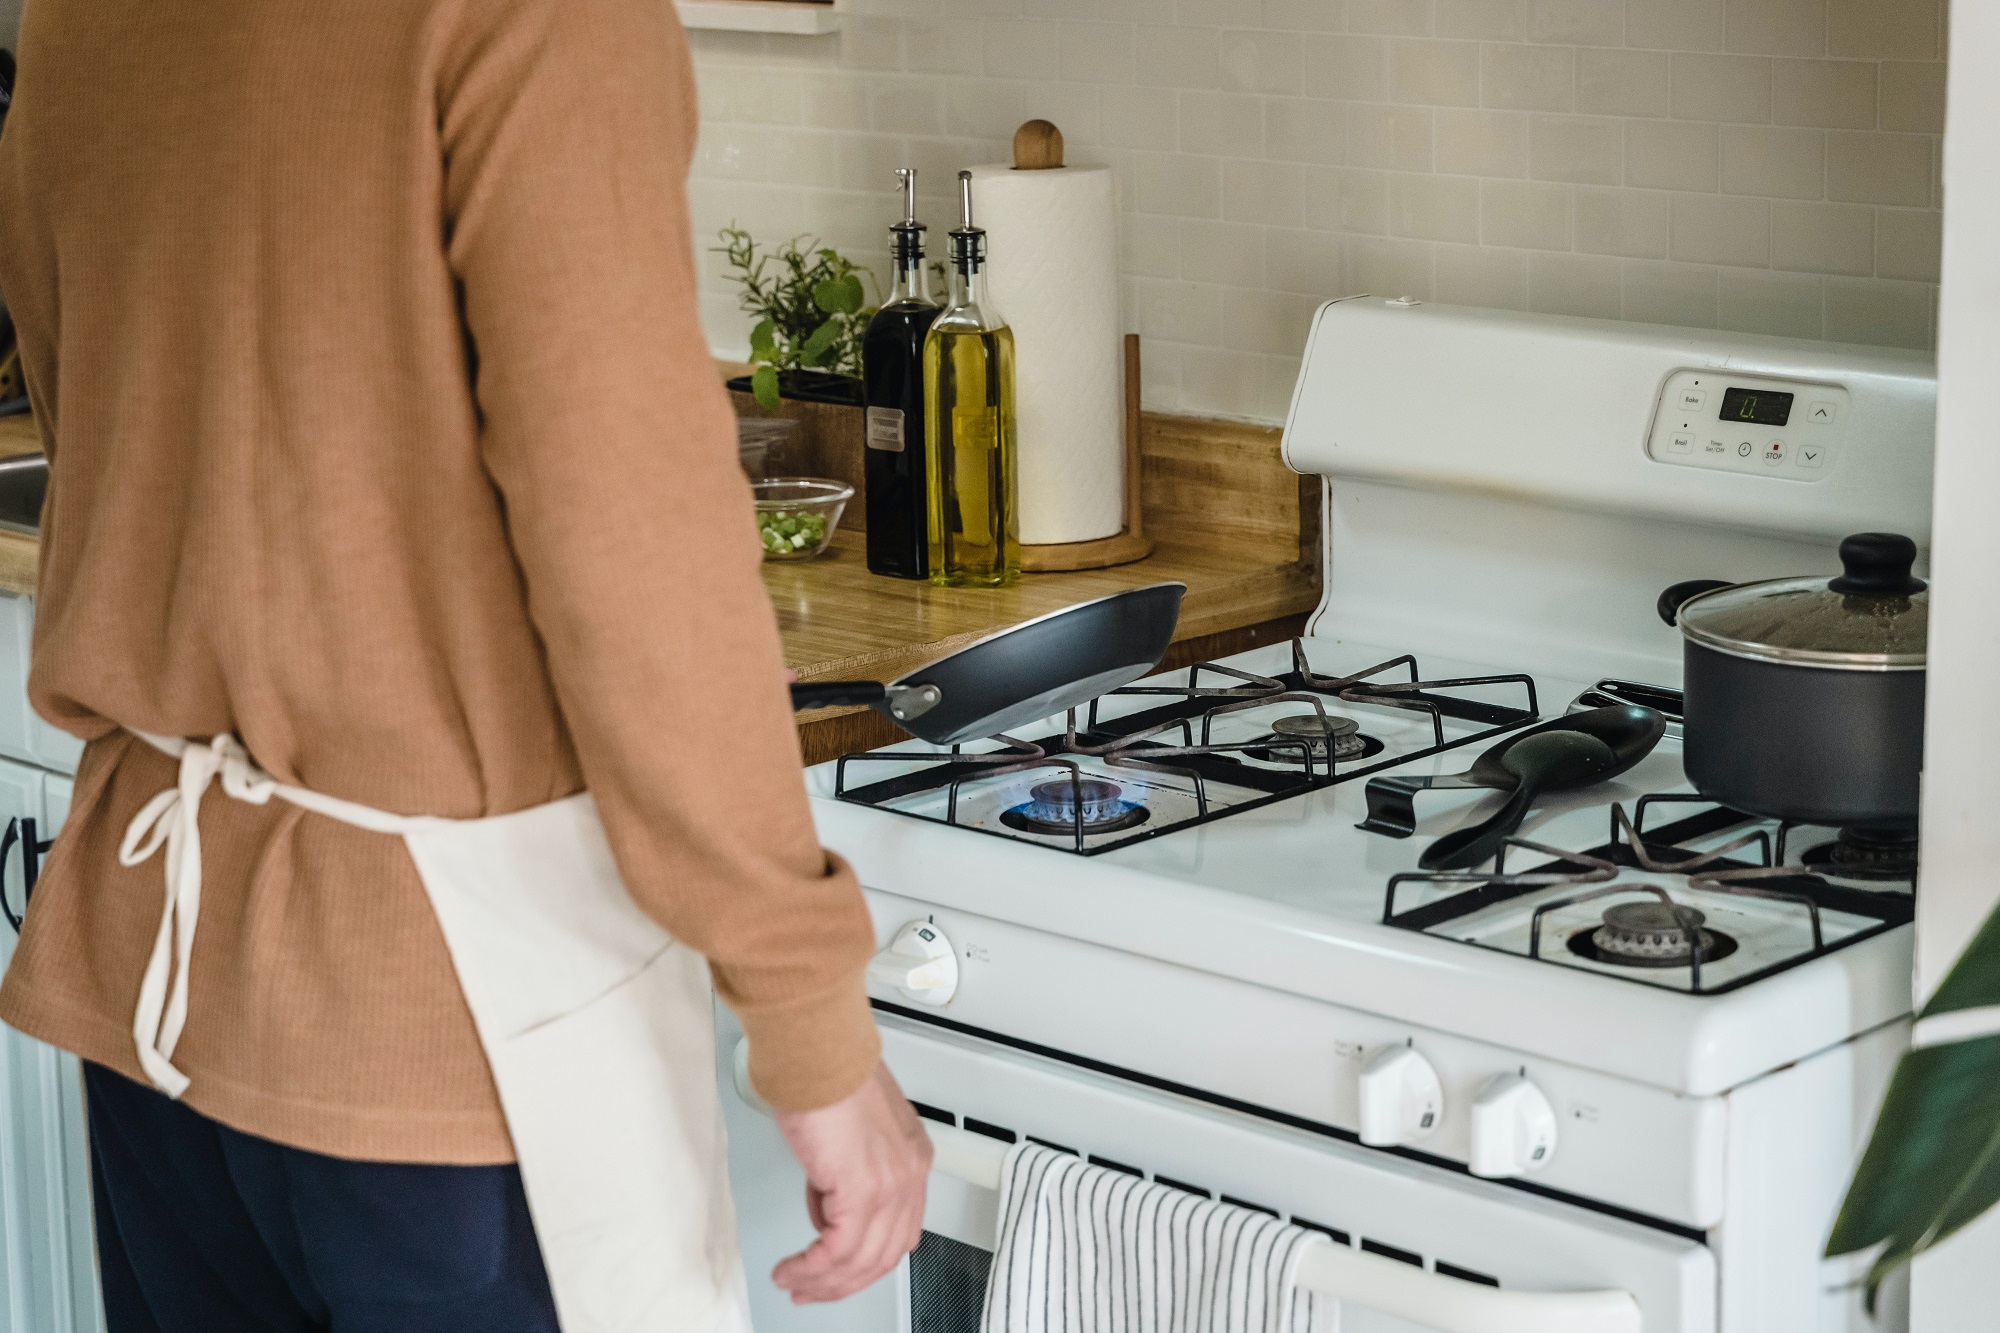 Person in brown sweater with a white apron frying something on a gas stove that's leaking methane